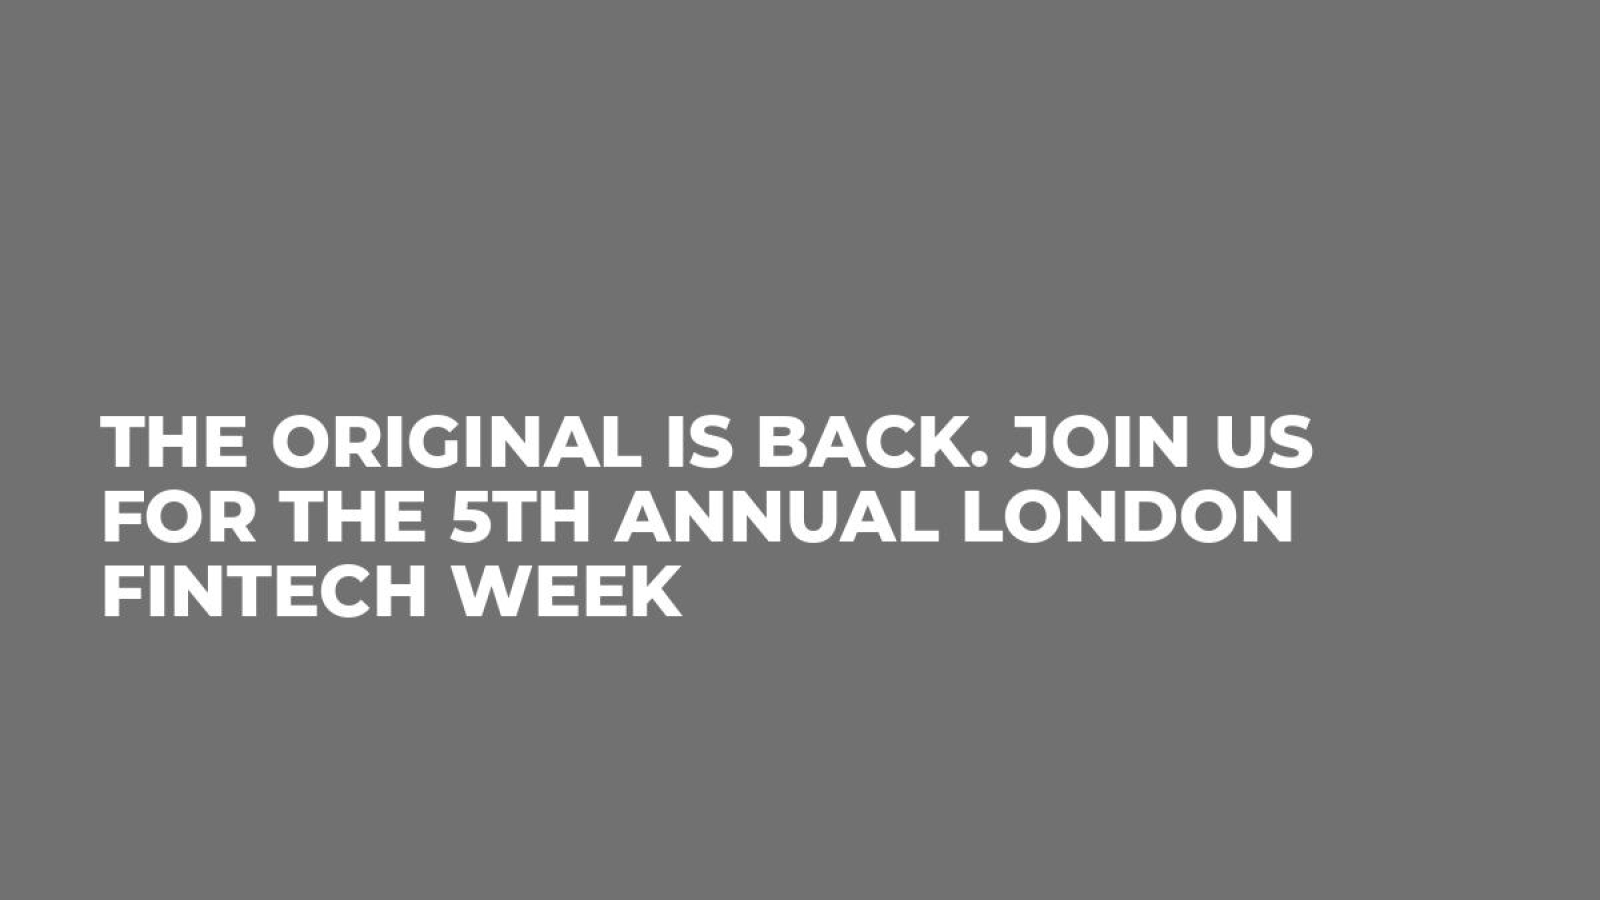 THE ORIGINAL IS BACK. JOIN US FOR THE 5TH ANNUAL LONDON FINTECH WEEK